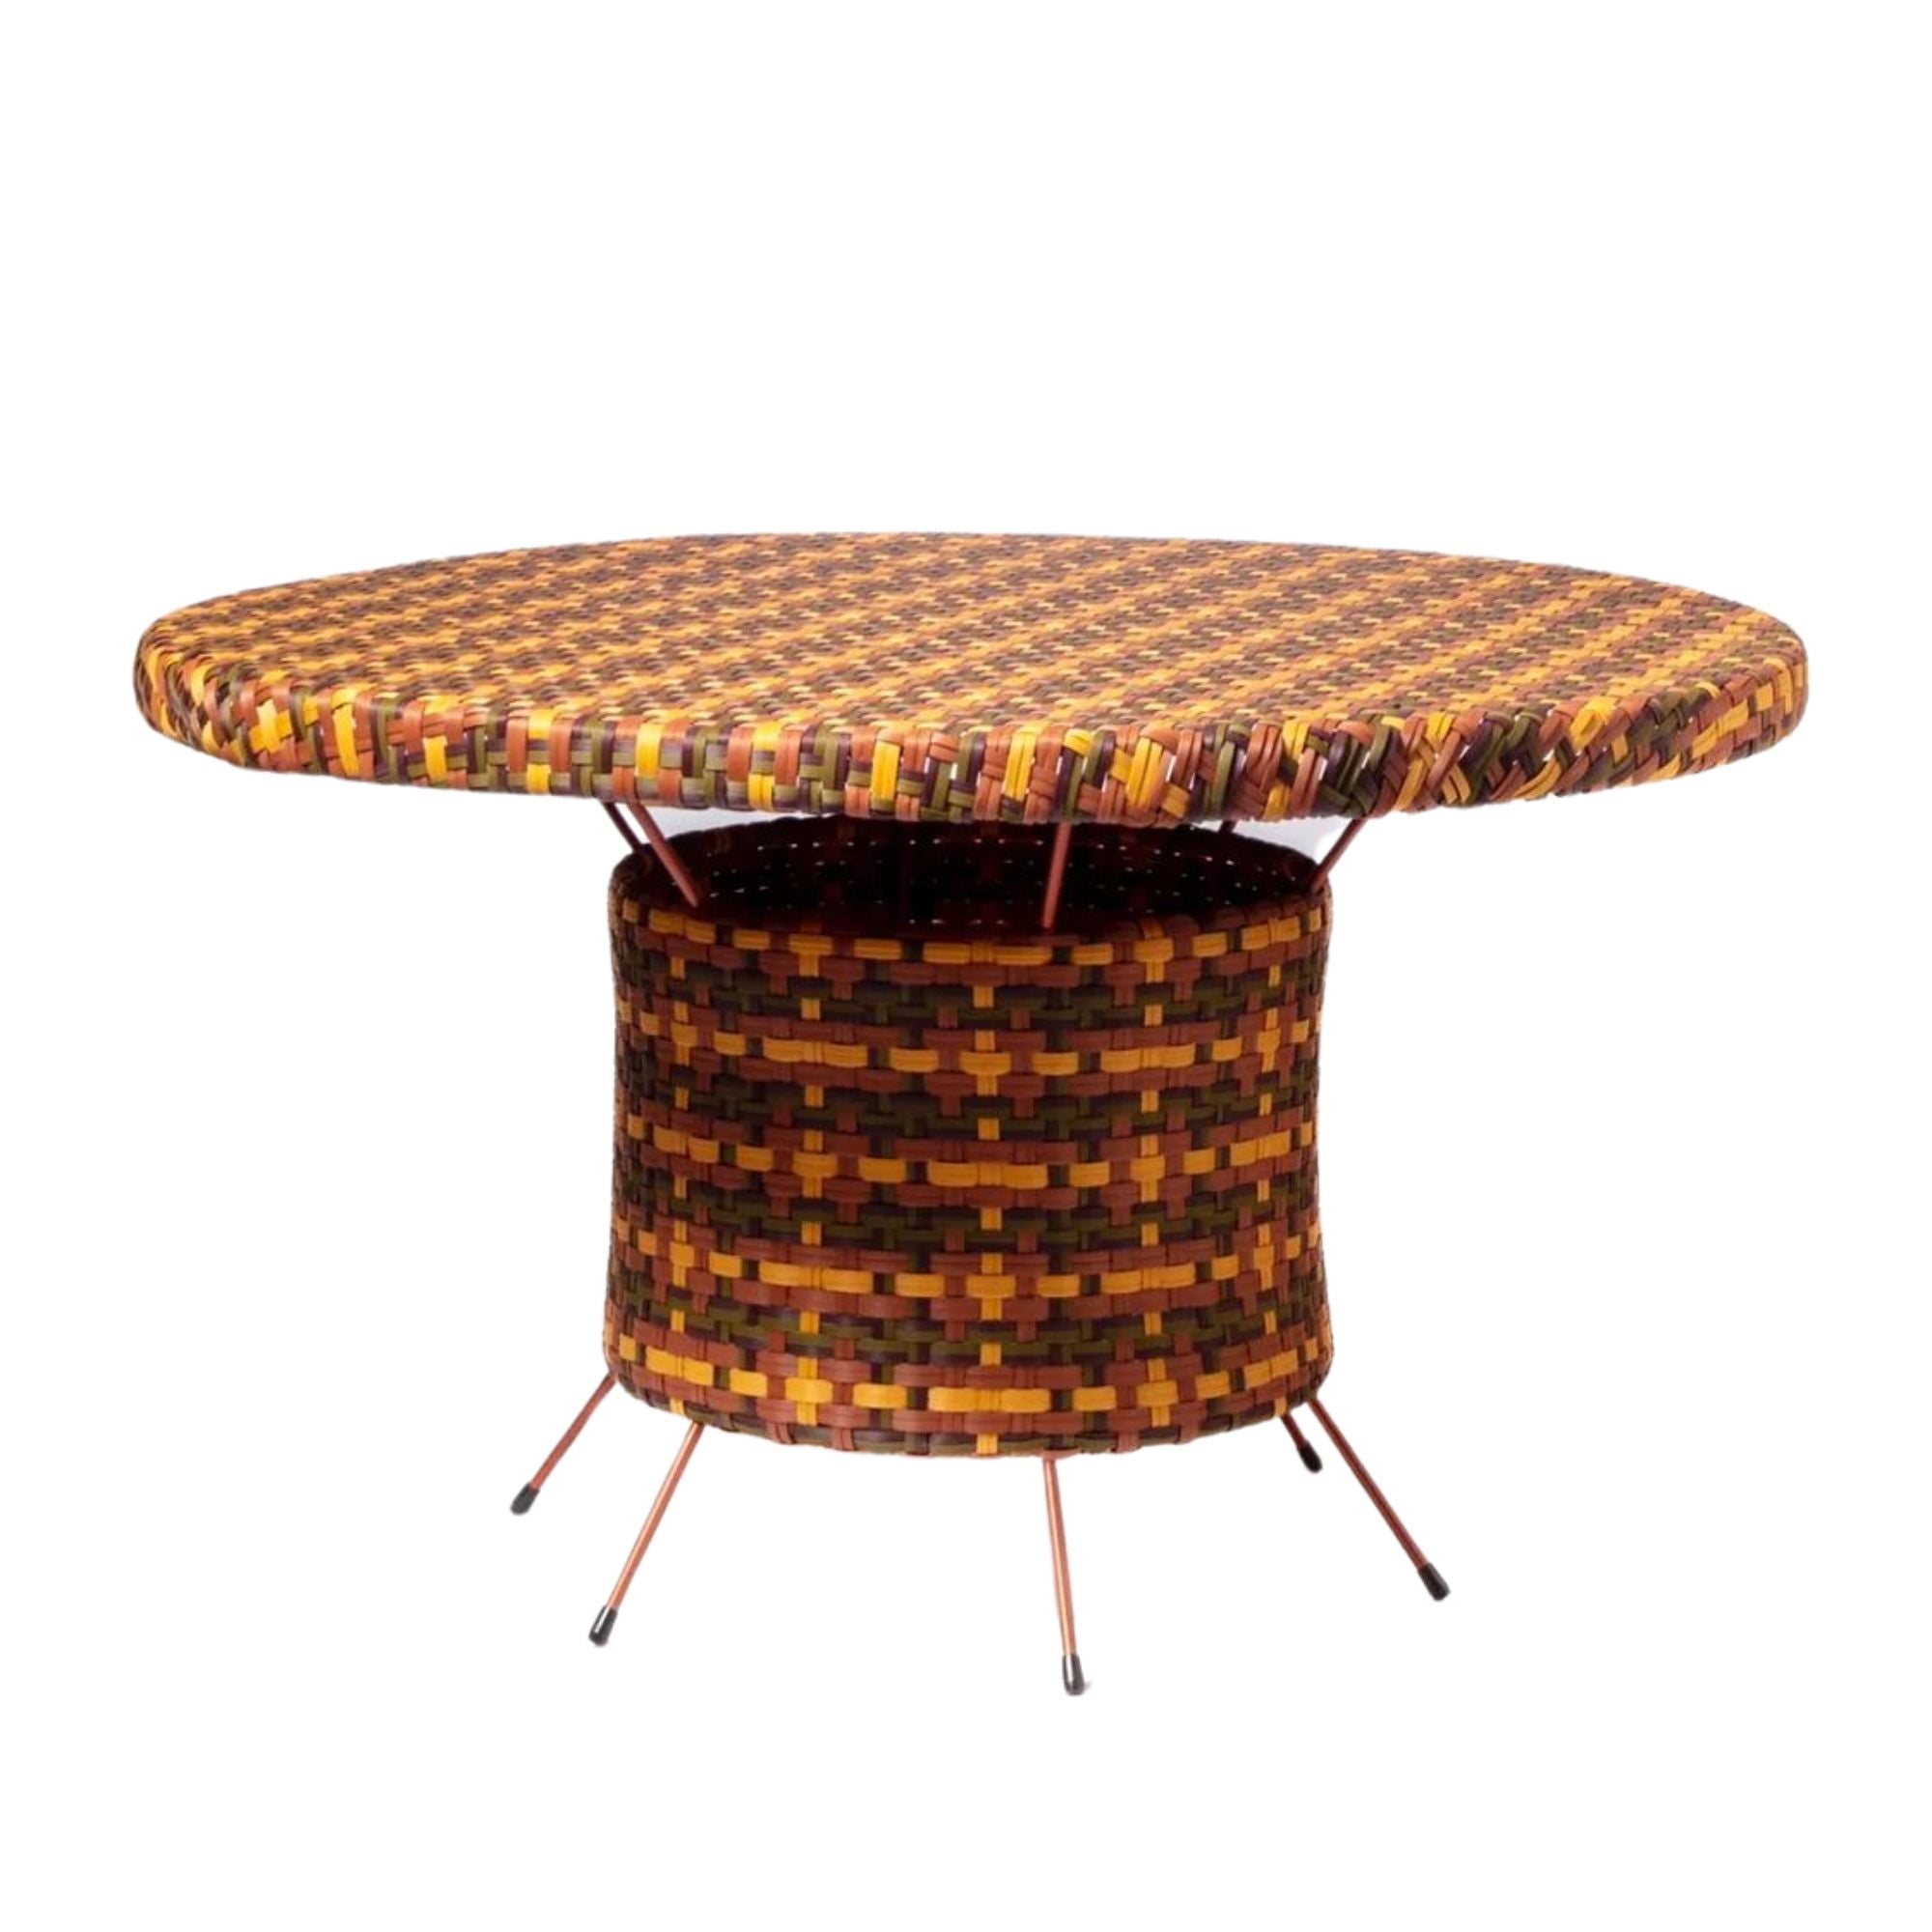 Woven Outdoor Dining Table - Spice